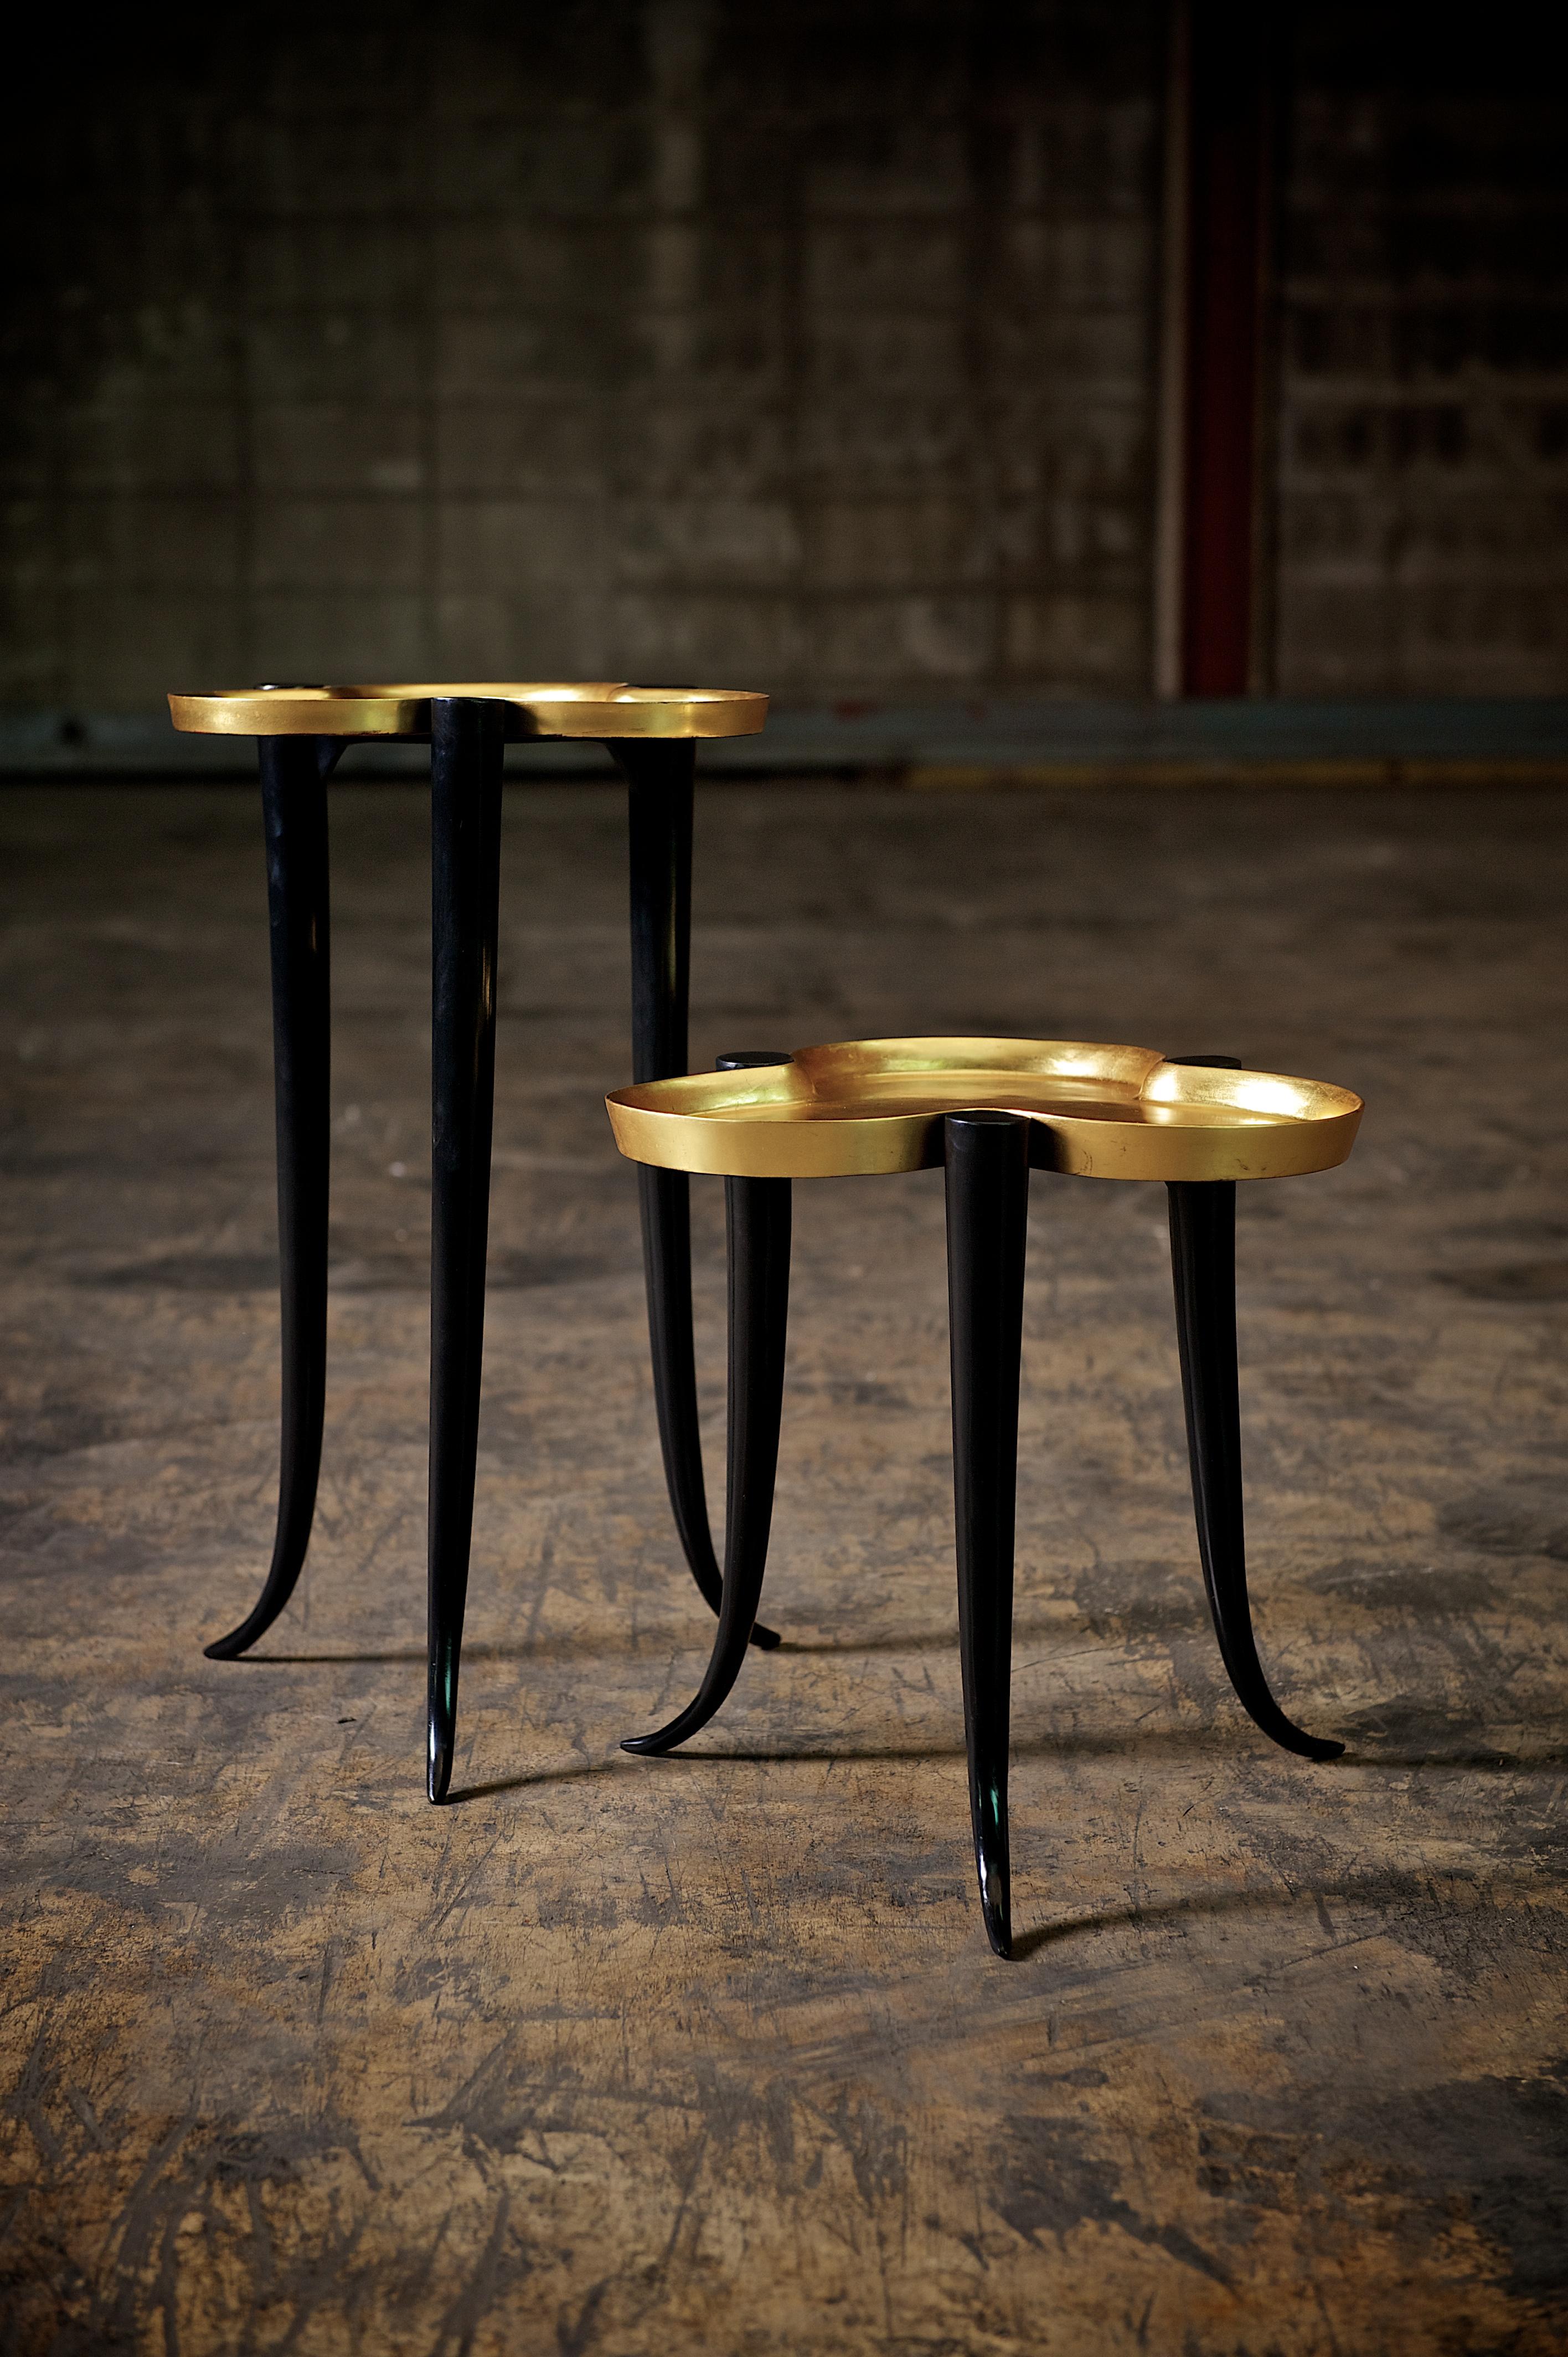 Low Chime Side Table in Bronze and Silver or Gold Leaf Lacquer by Elan Atelier

Chime side table is composed of cast bronze legs with a gilt lacquer trey top. The chime is available with either a silver leaf or gold leaf lacquer top. Custom sizes